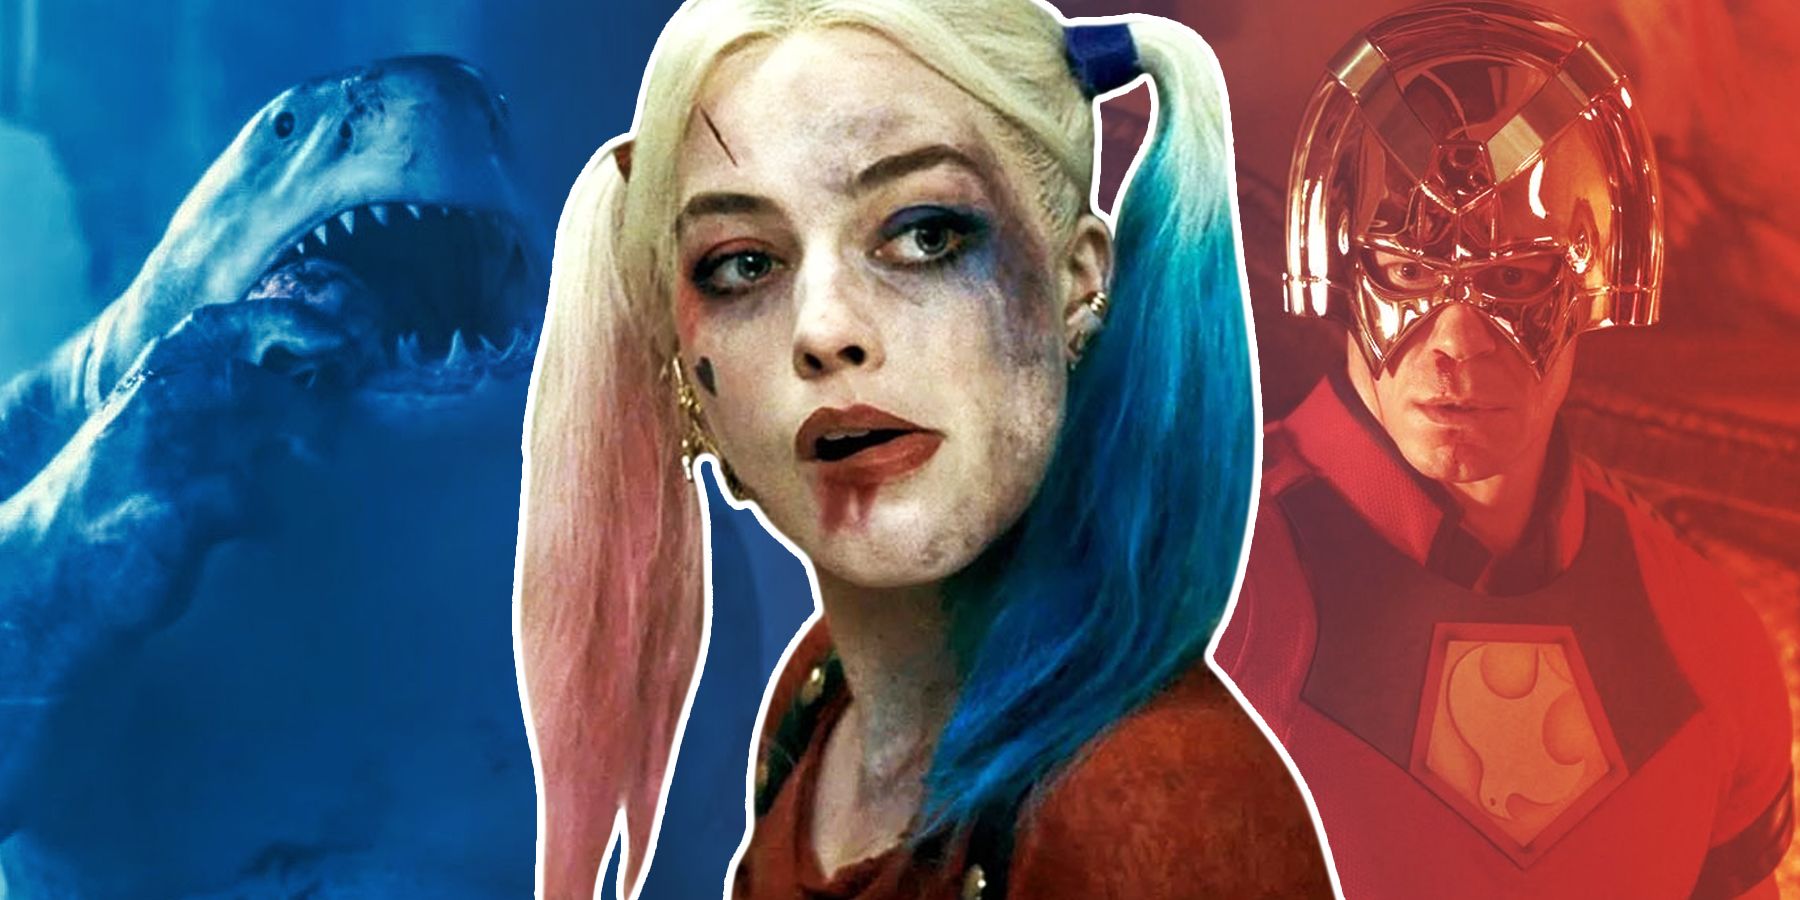 Suicide Squad is the First DCEU Film with Heart, by Kensei Yonzon